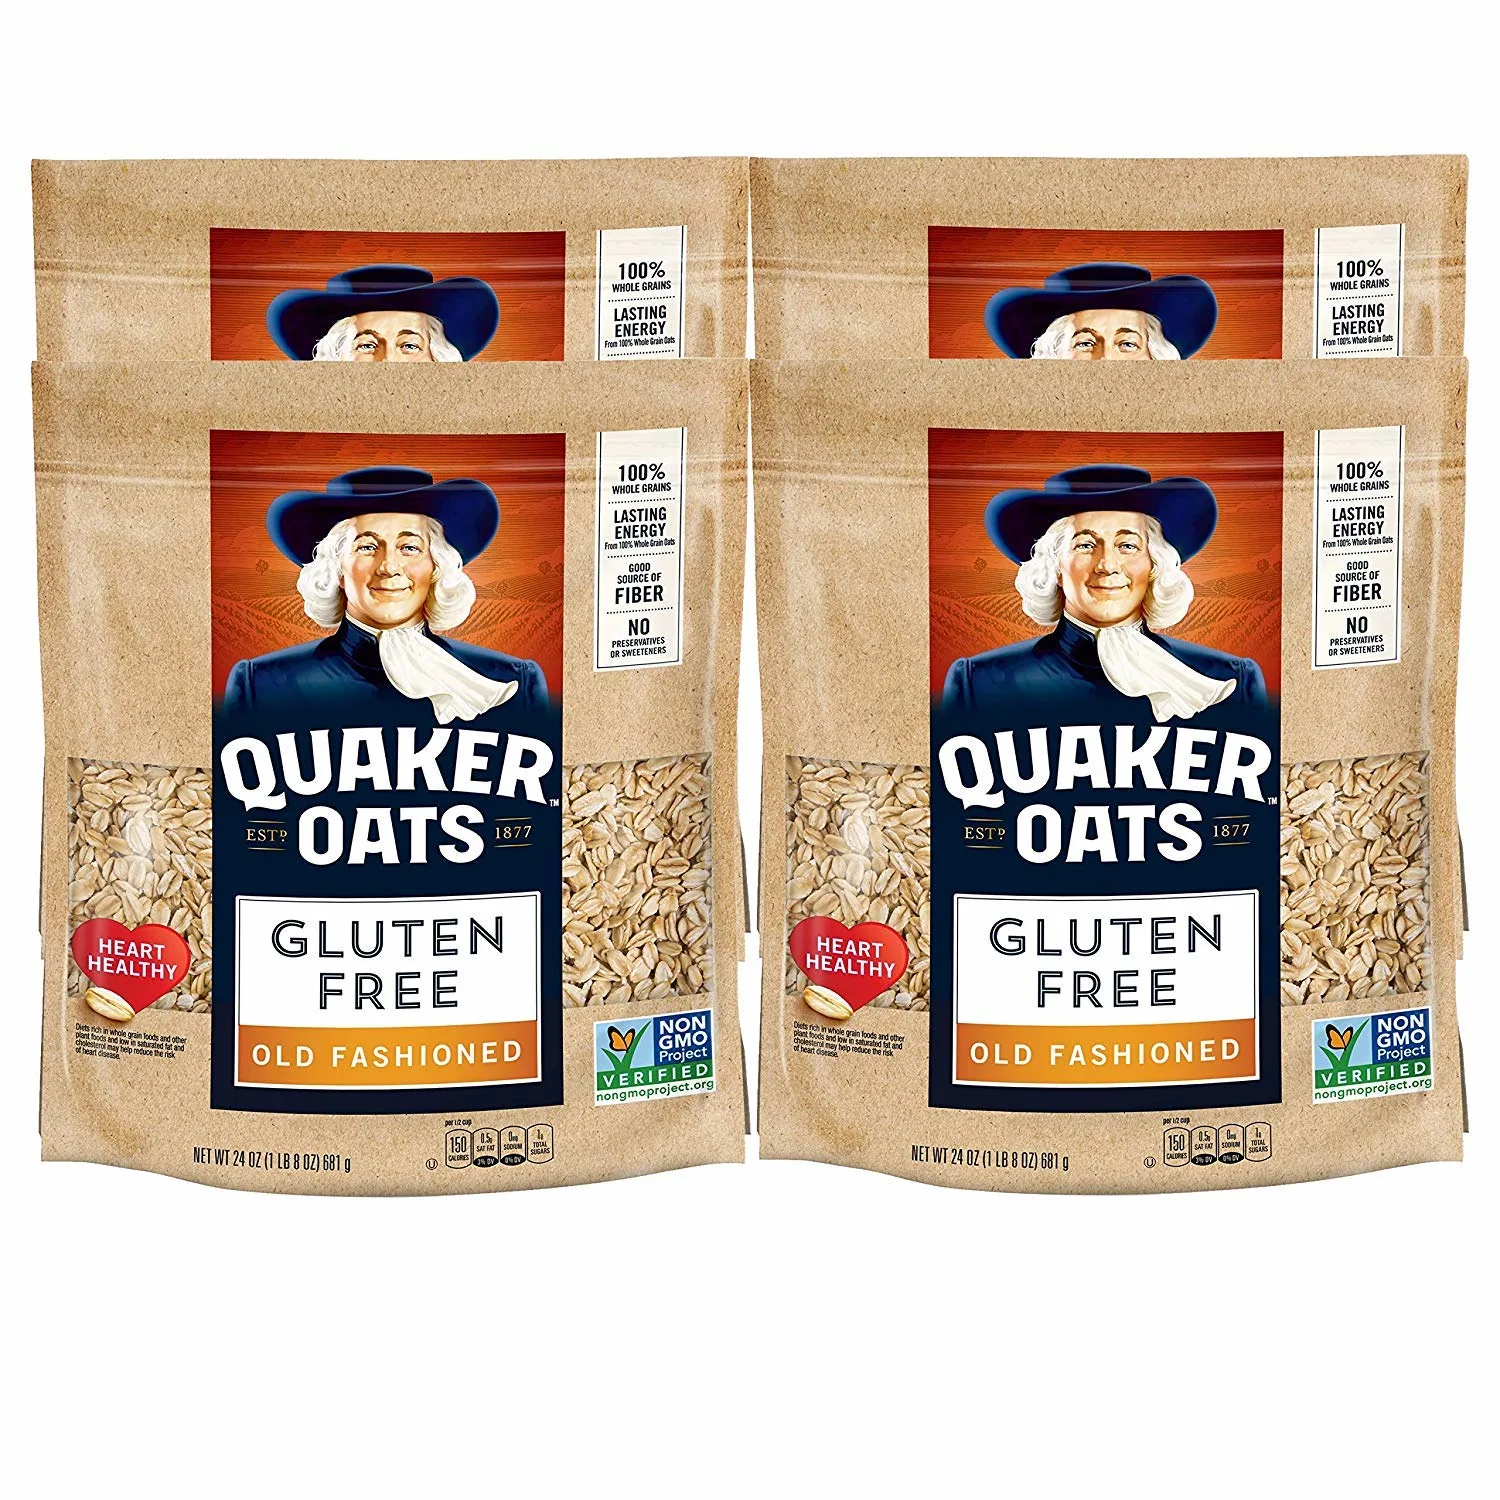 Quaker Gluten Free Old Fashioned Rolled Oats.